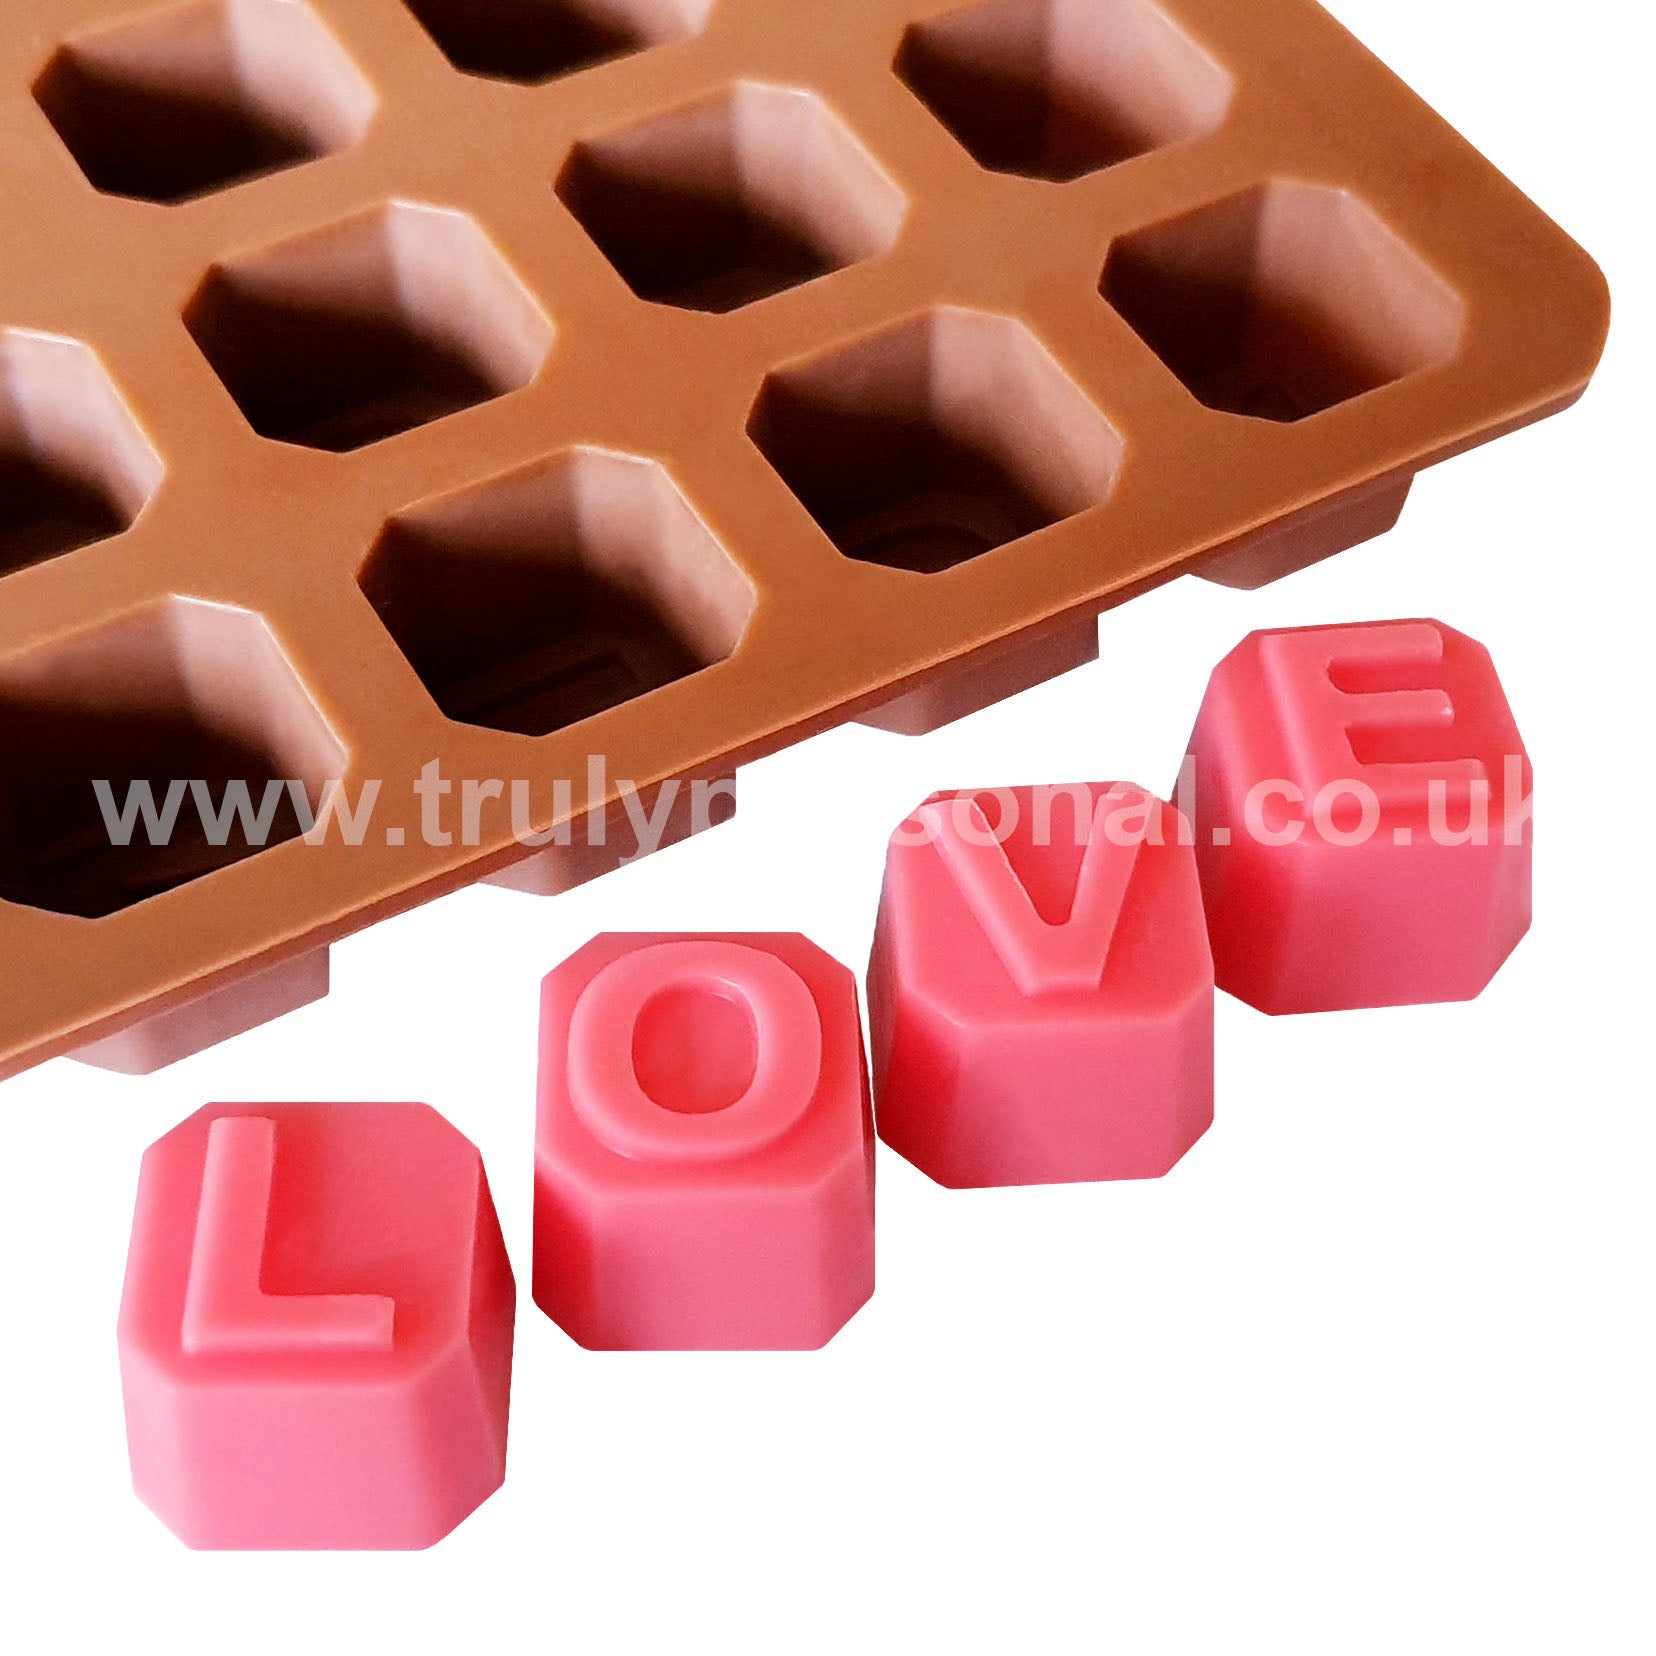 Alphabet Silicone Mould | Wax Melts | Truly Personal Ltd